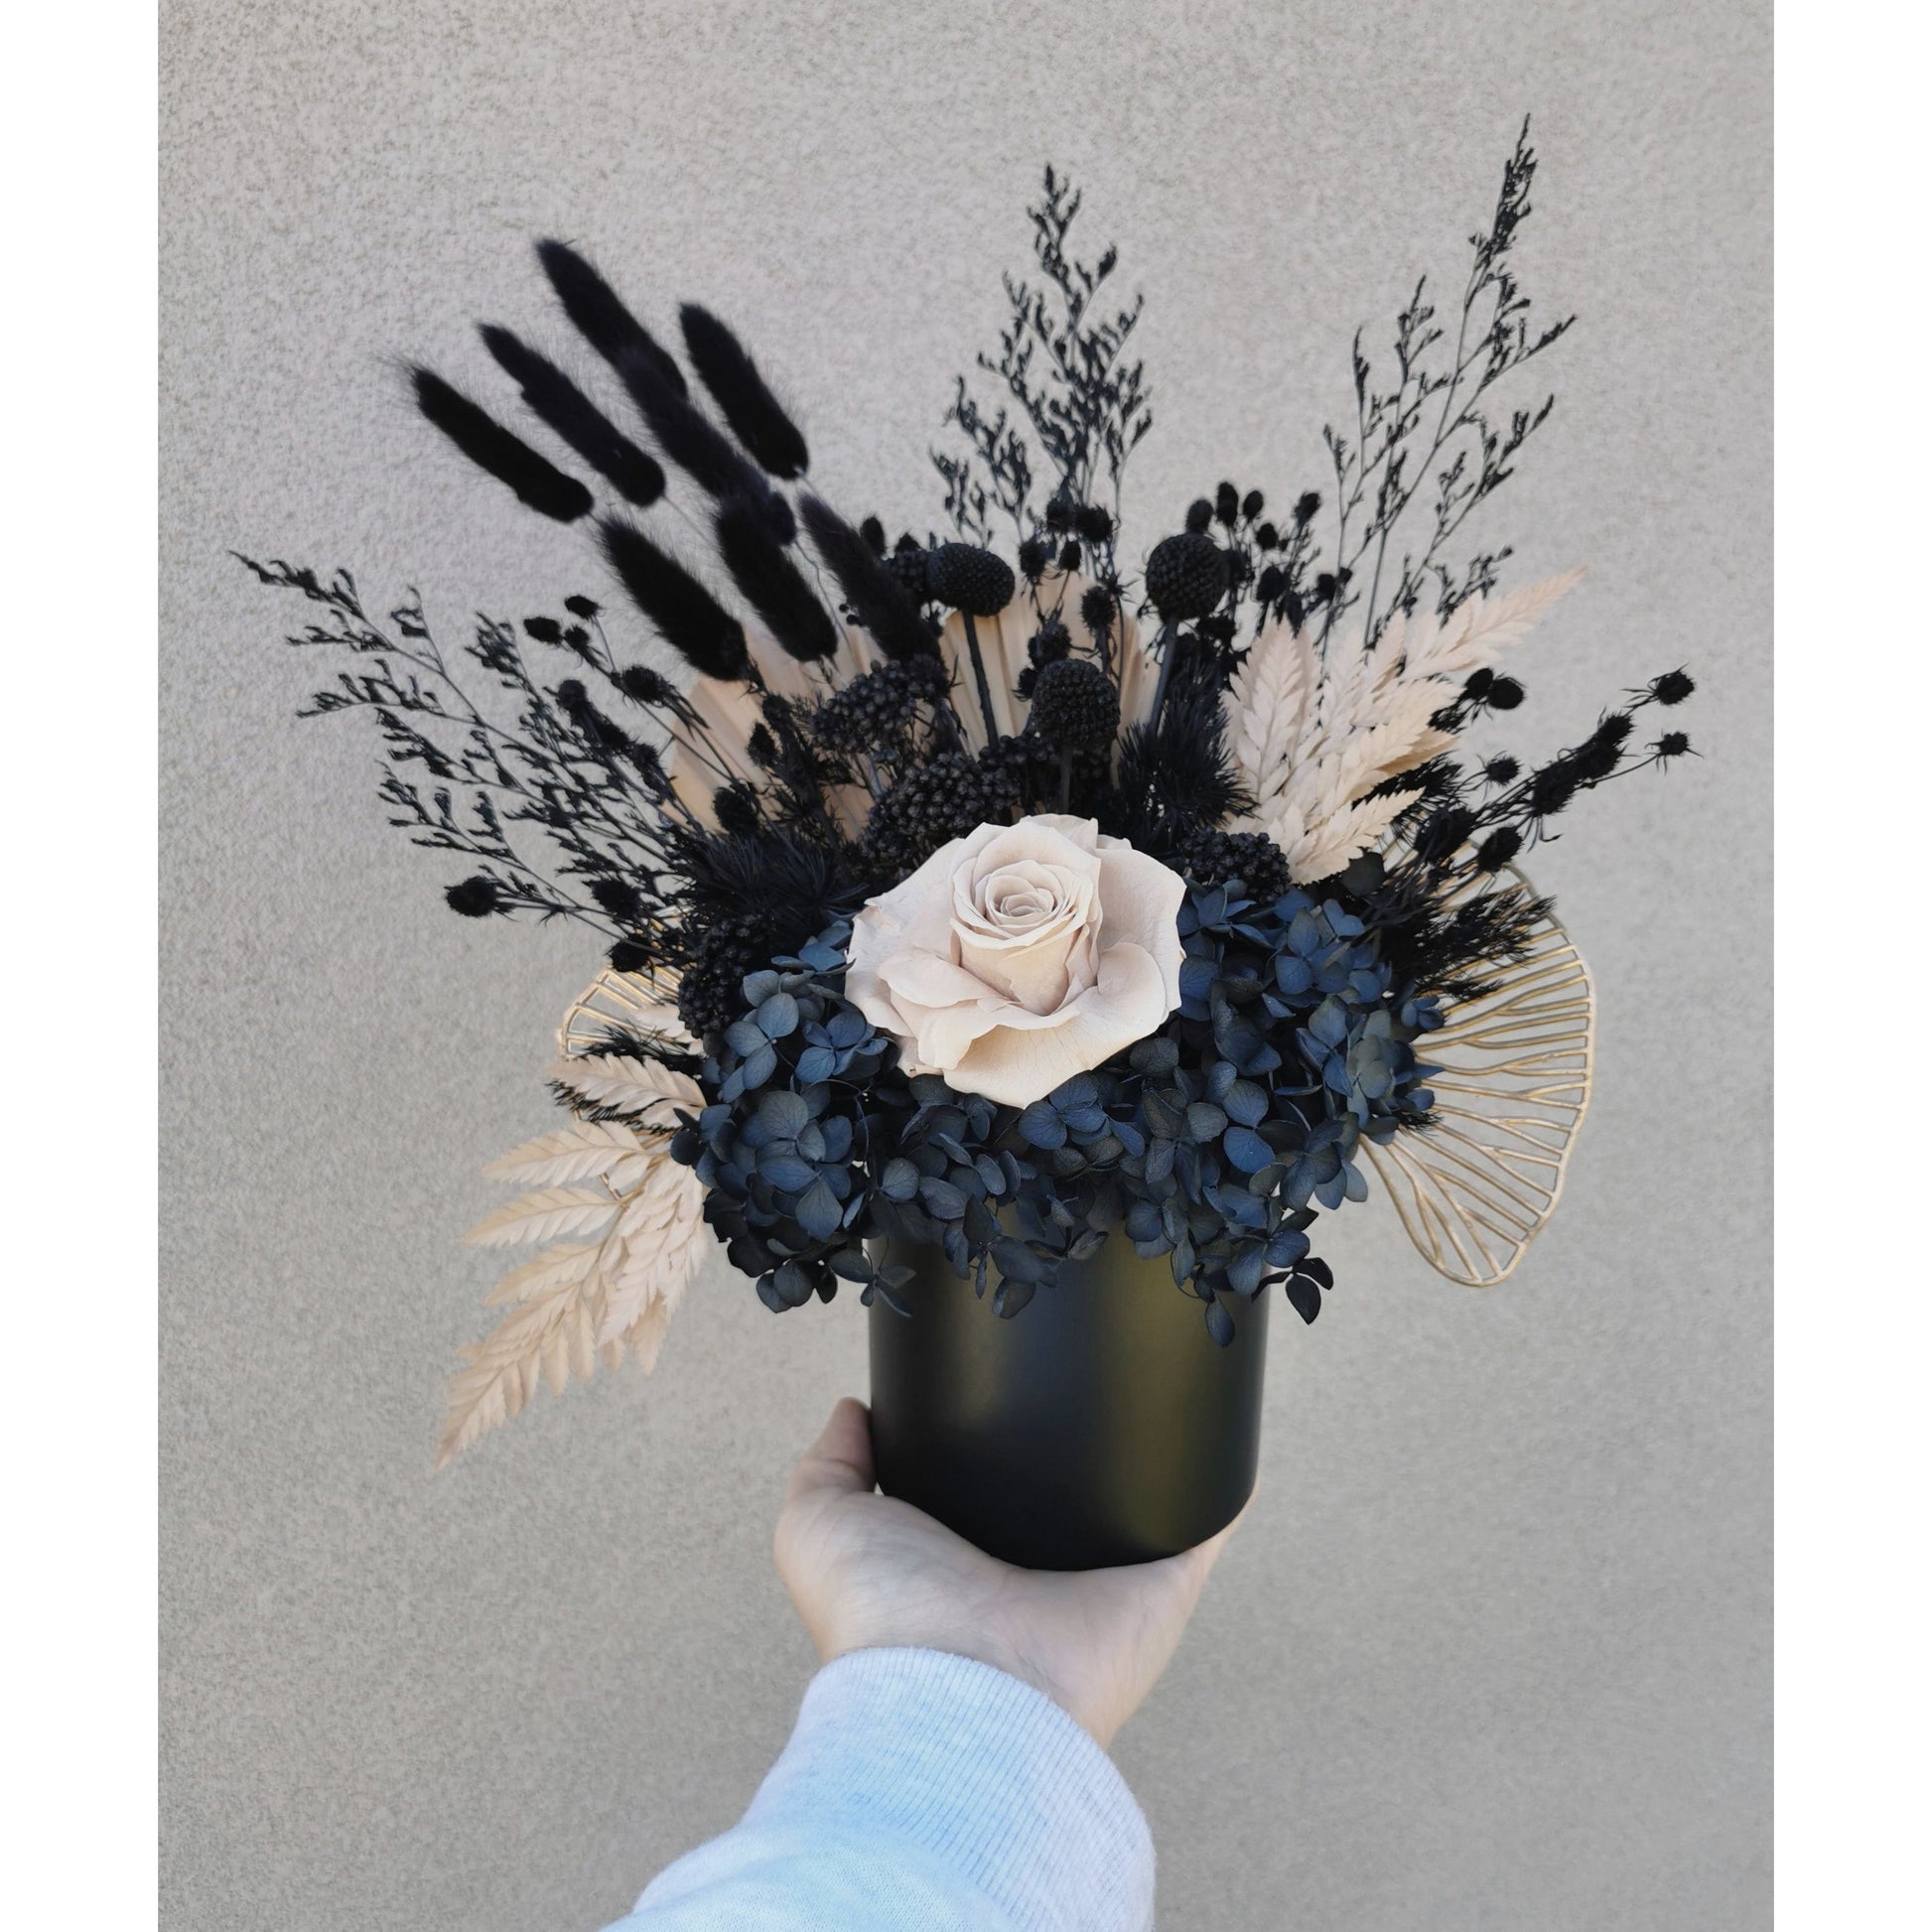 Black, nude & gold dried flowers set in to a black pot. Picture shows arrangement being held up against a blank wall